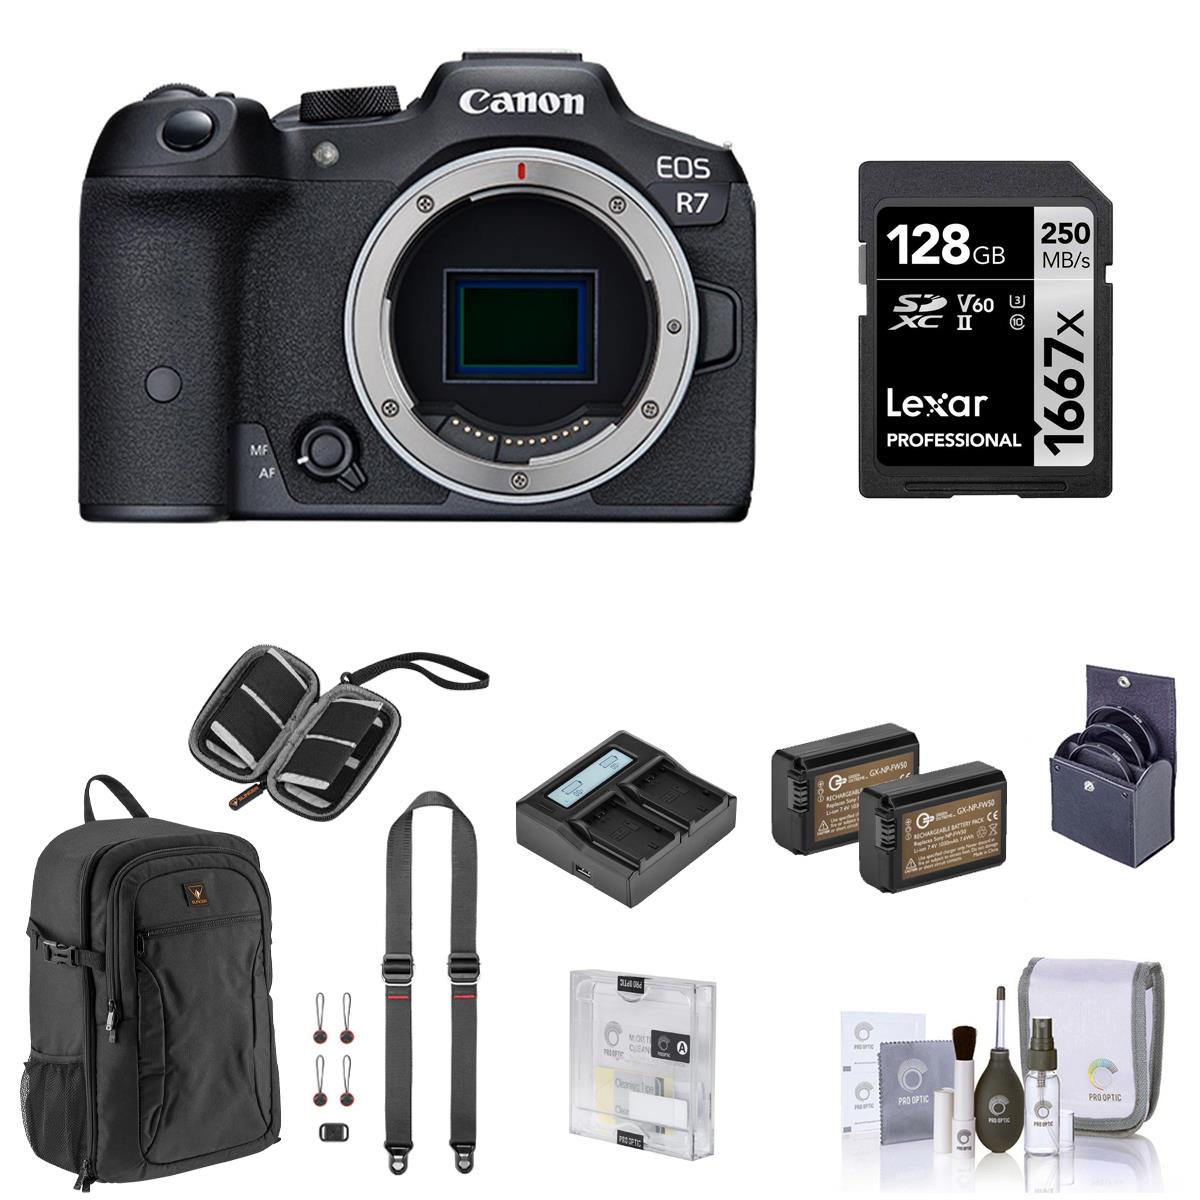 Image of Canon EOS R7 Mirrorless Digital Camera Body with Complete Accessories Kit